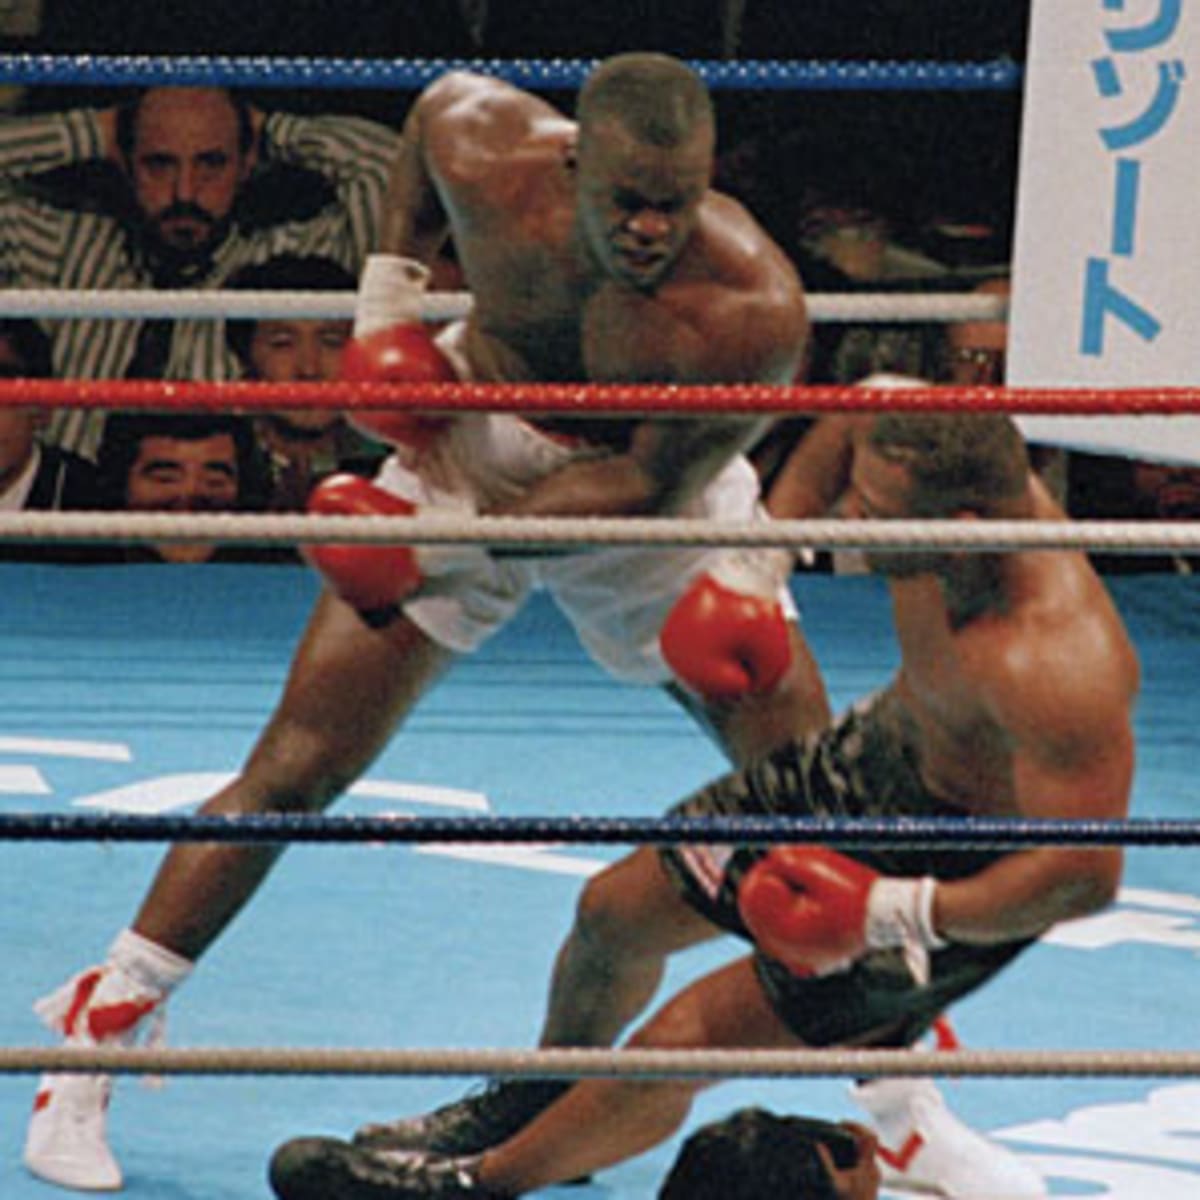 Review: ESPN's doc about Buster Douglas' long-shot win over Mike